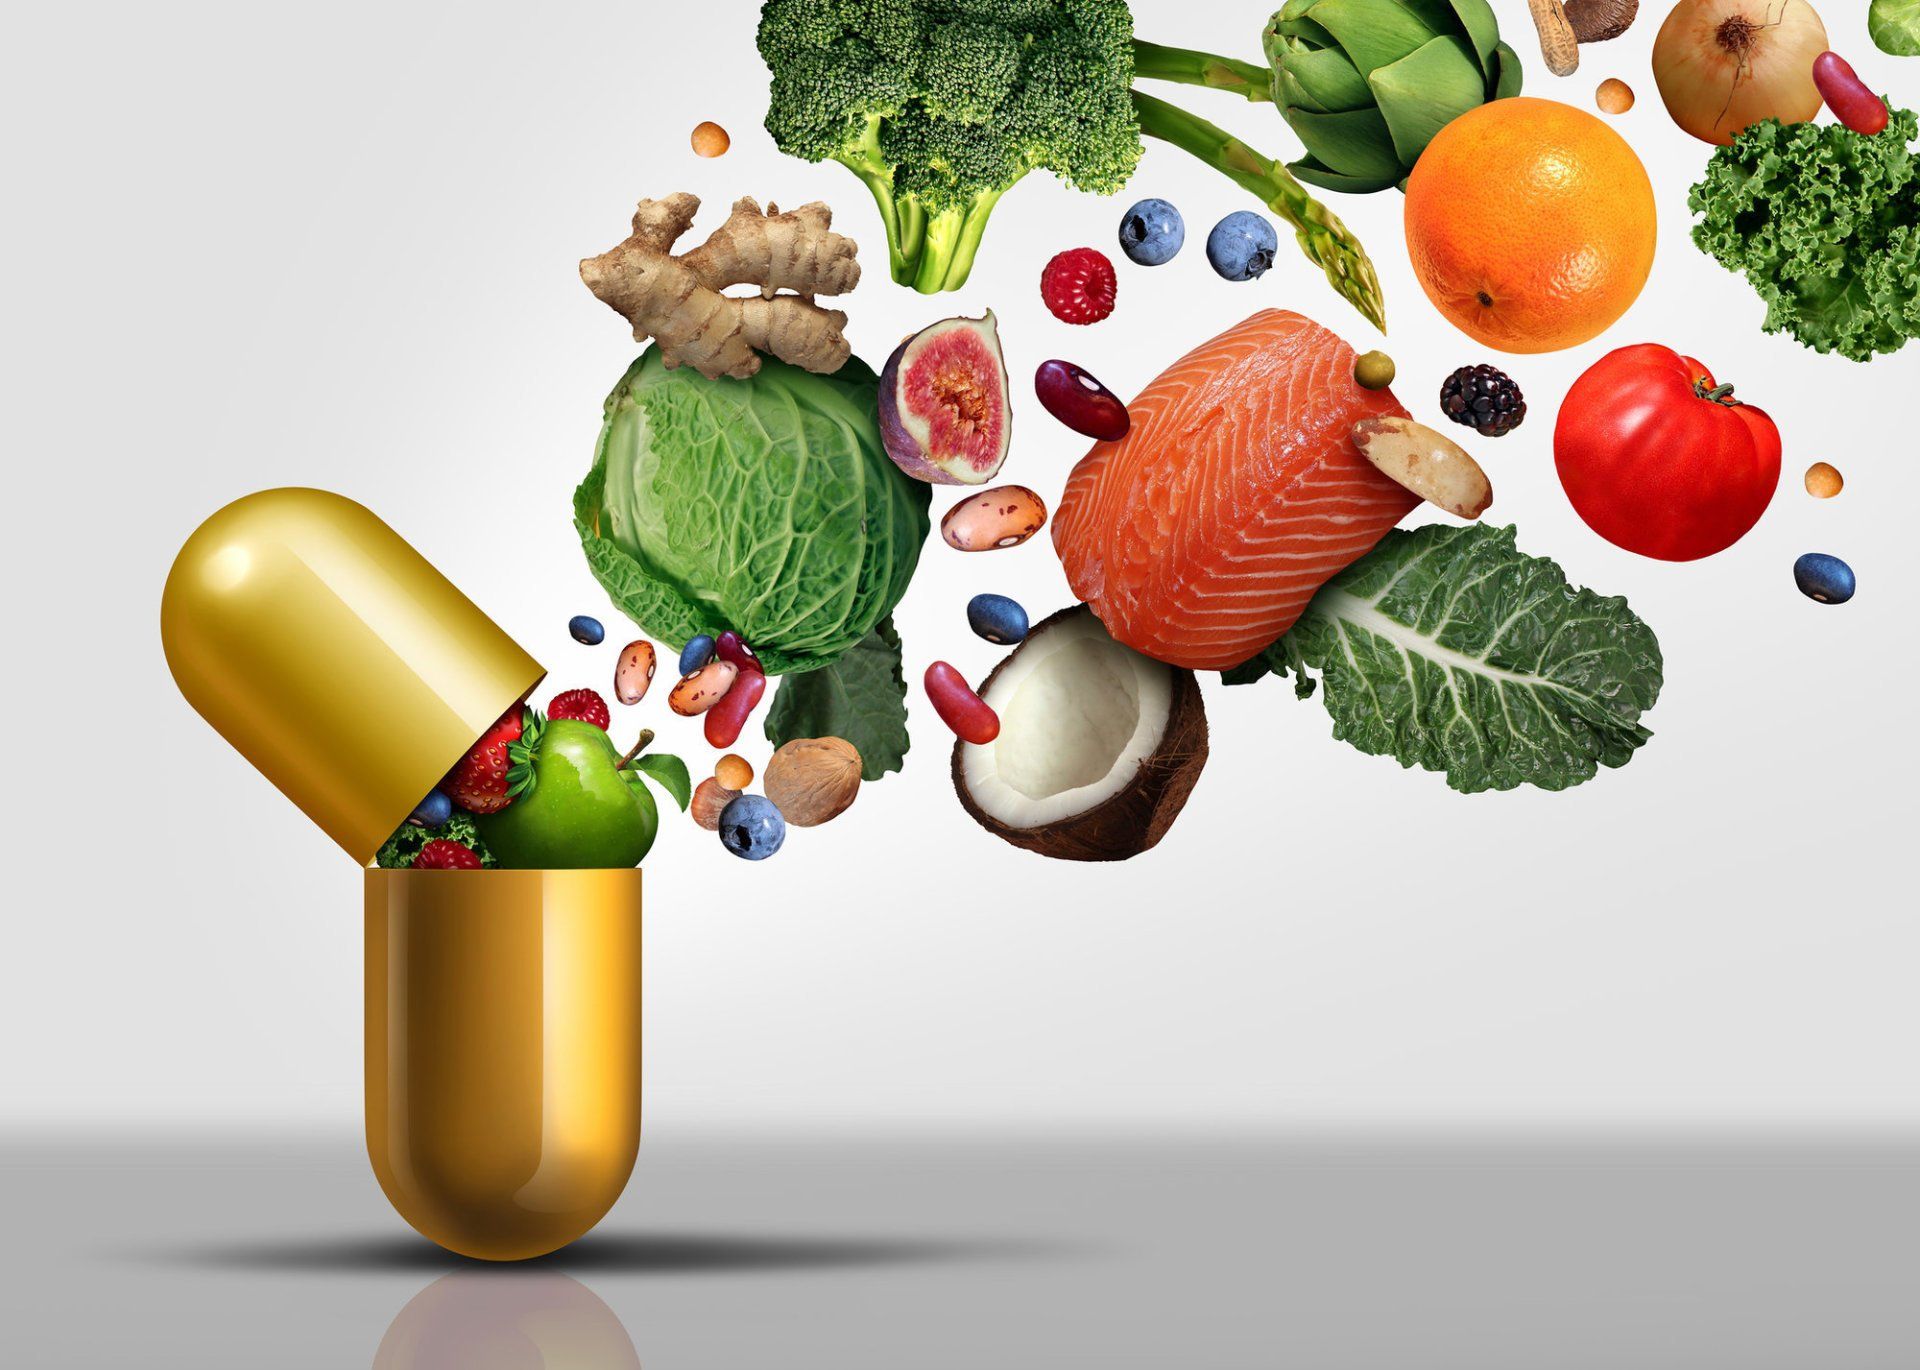 A pill capsule opening and releasing a variety of healthy foods including salmon, coconut, greens.